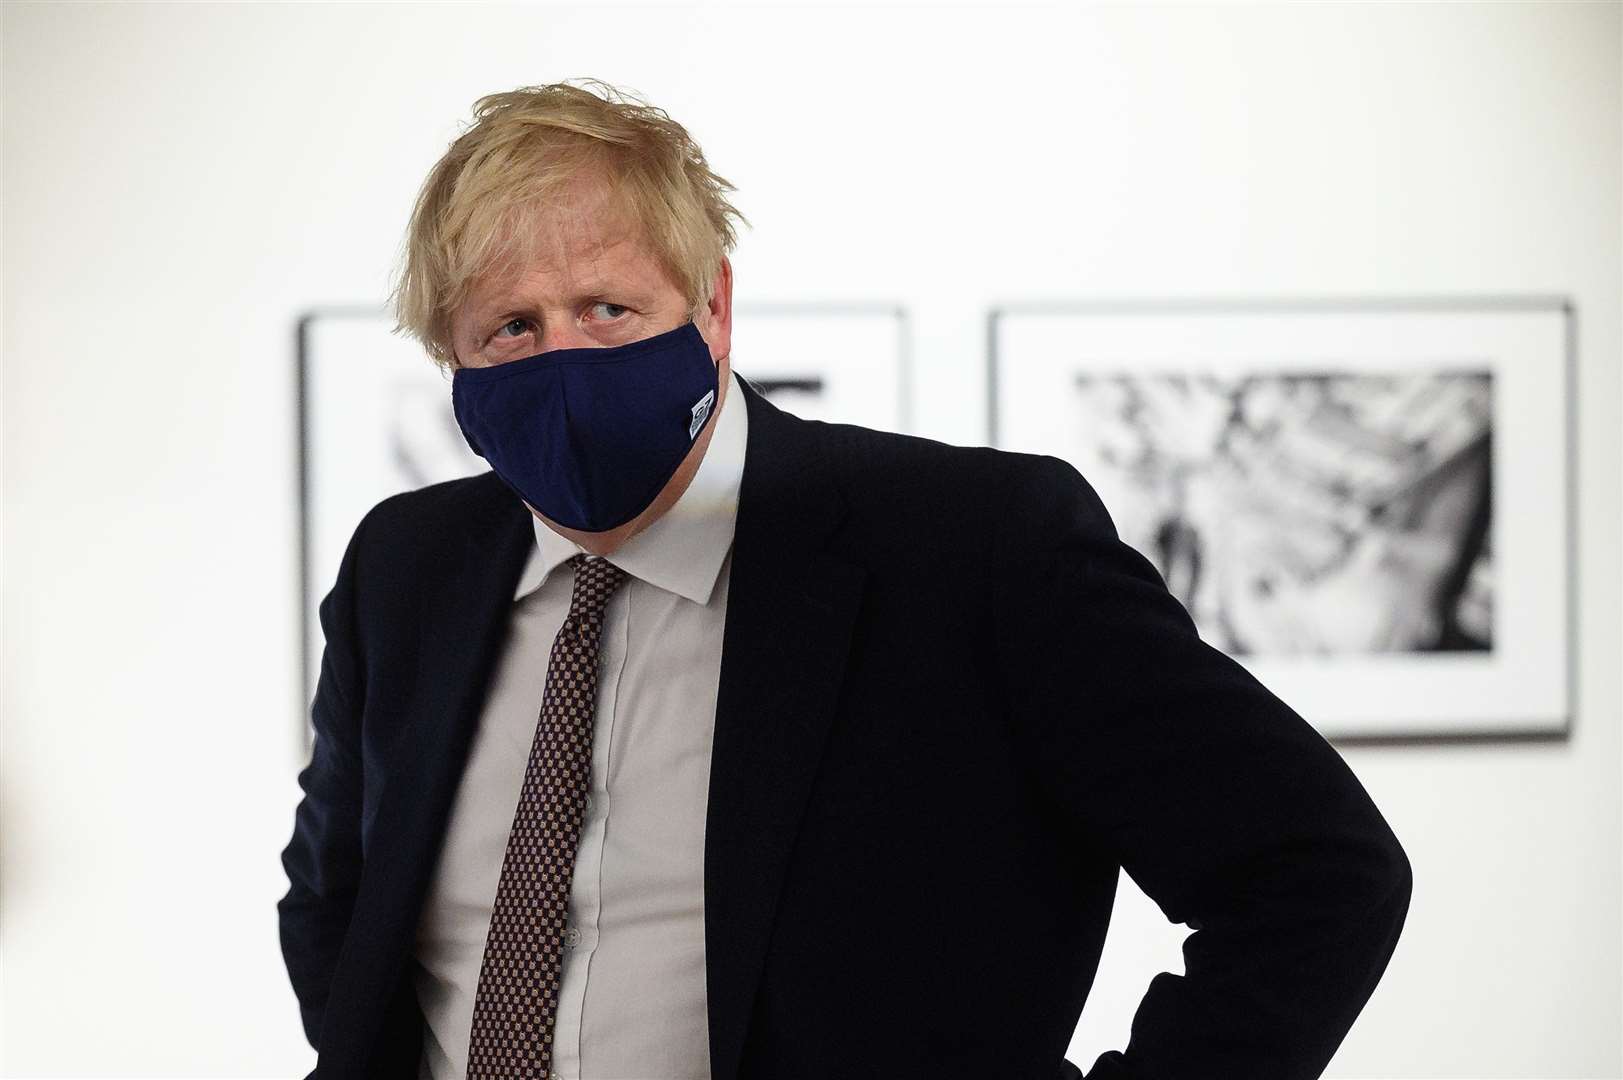 Boris Johnson will tell the country that people will be left to work out how to reduce the risk posed by Covid, in the absence of Government restrictions